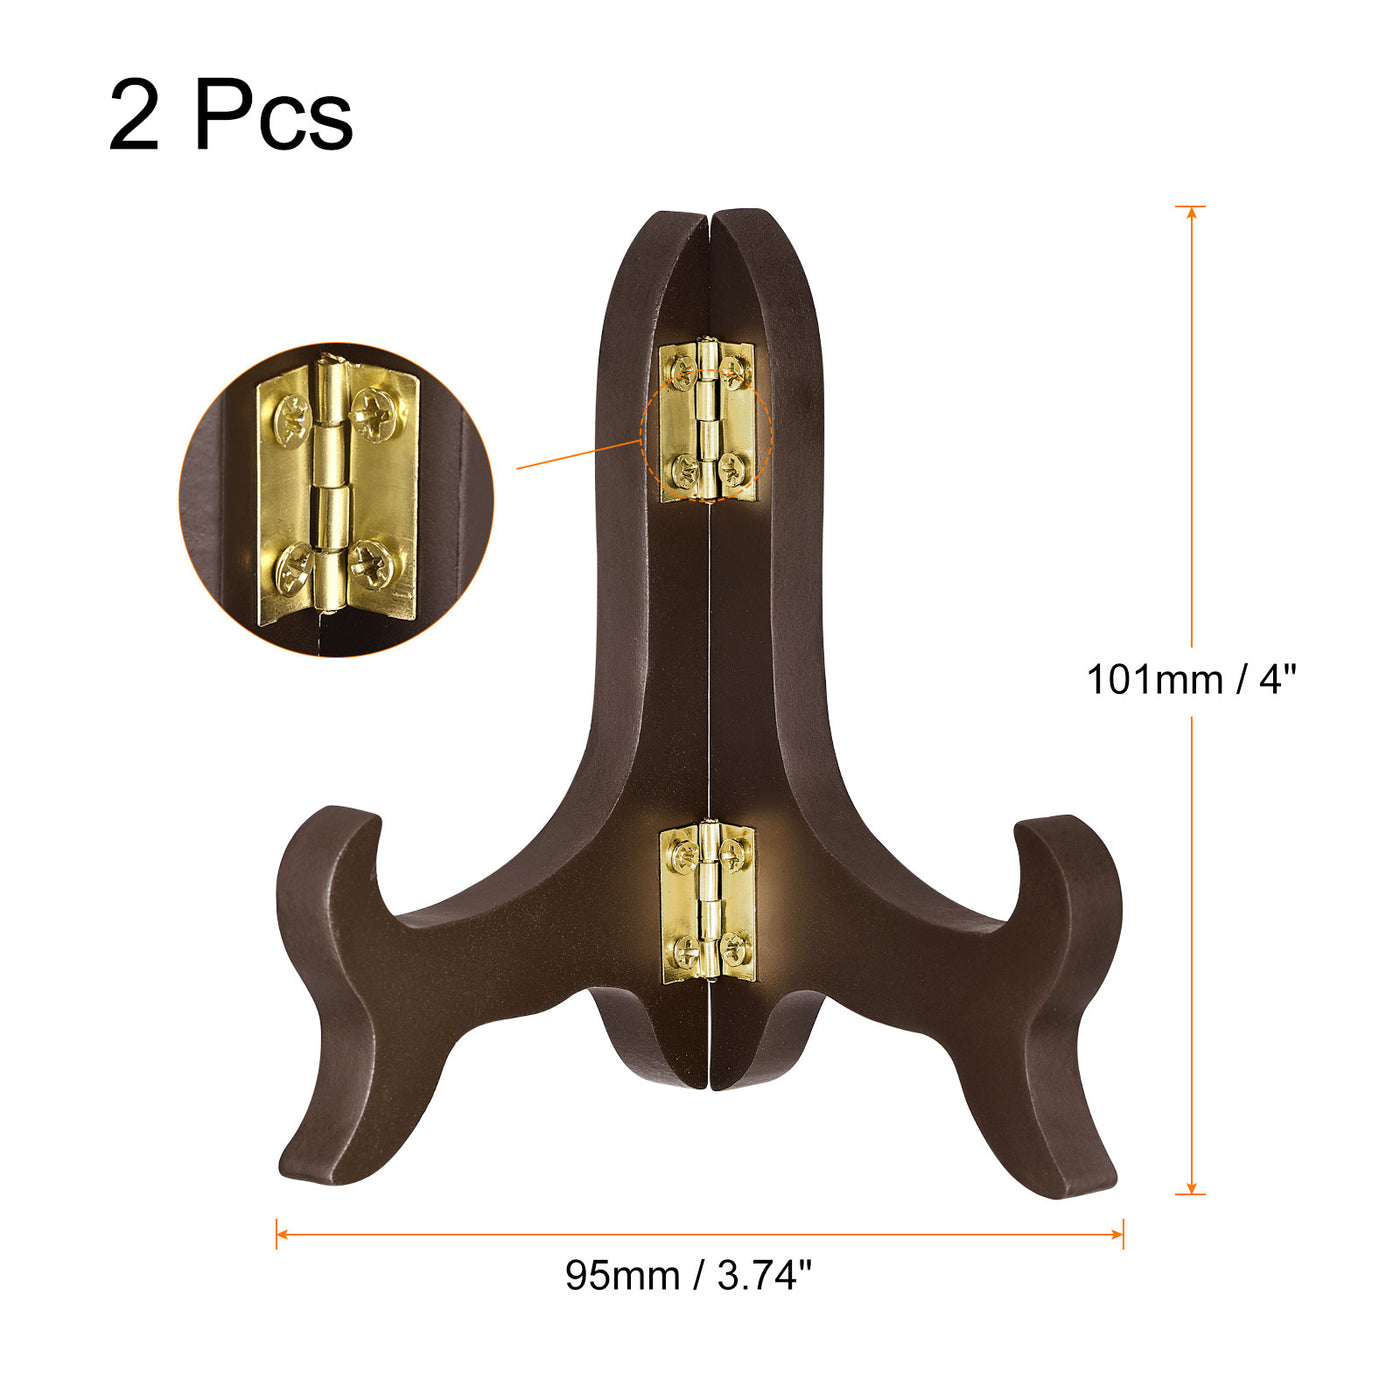 uxcell Uxcell 2pcs 4" Easel Plate Holder, Wooden Folding Display Stand Brown for Decorative Picture Frame